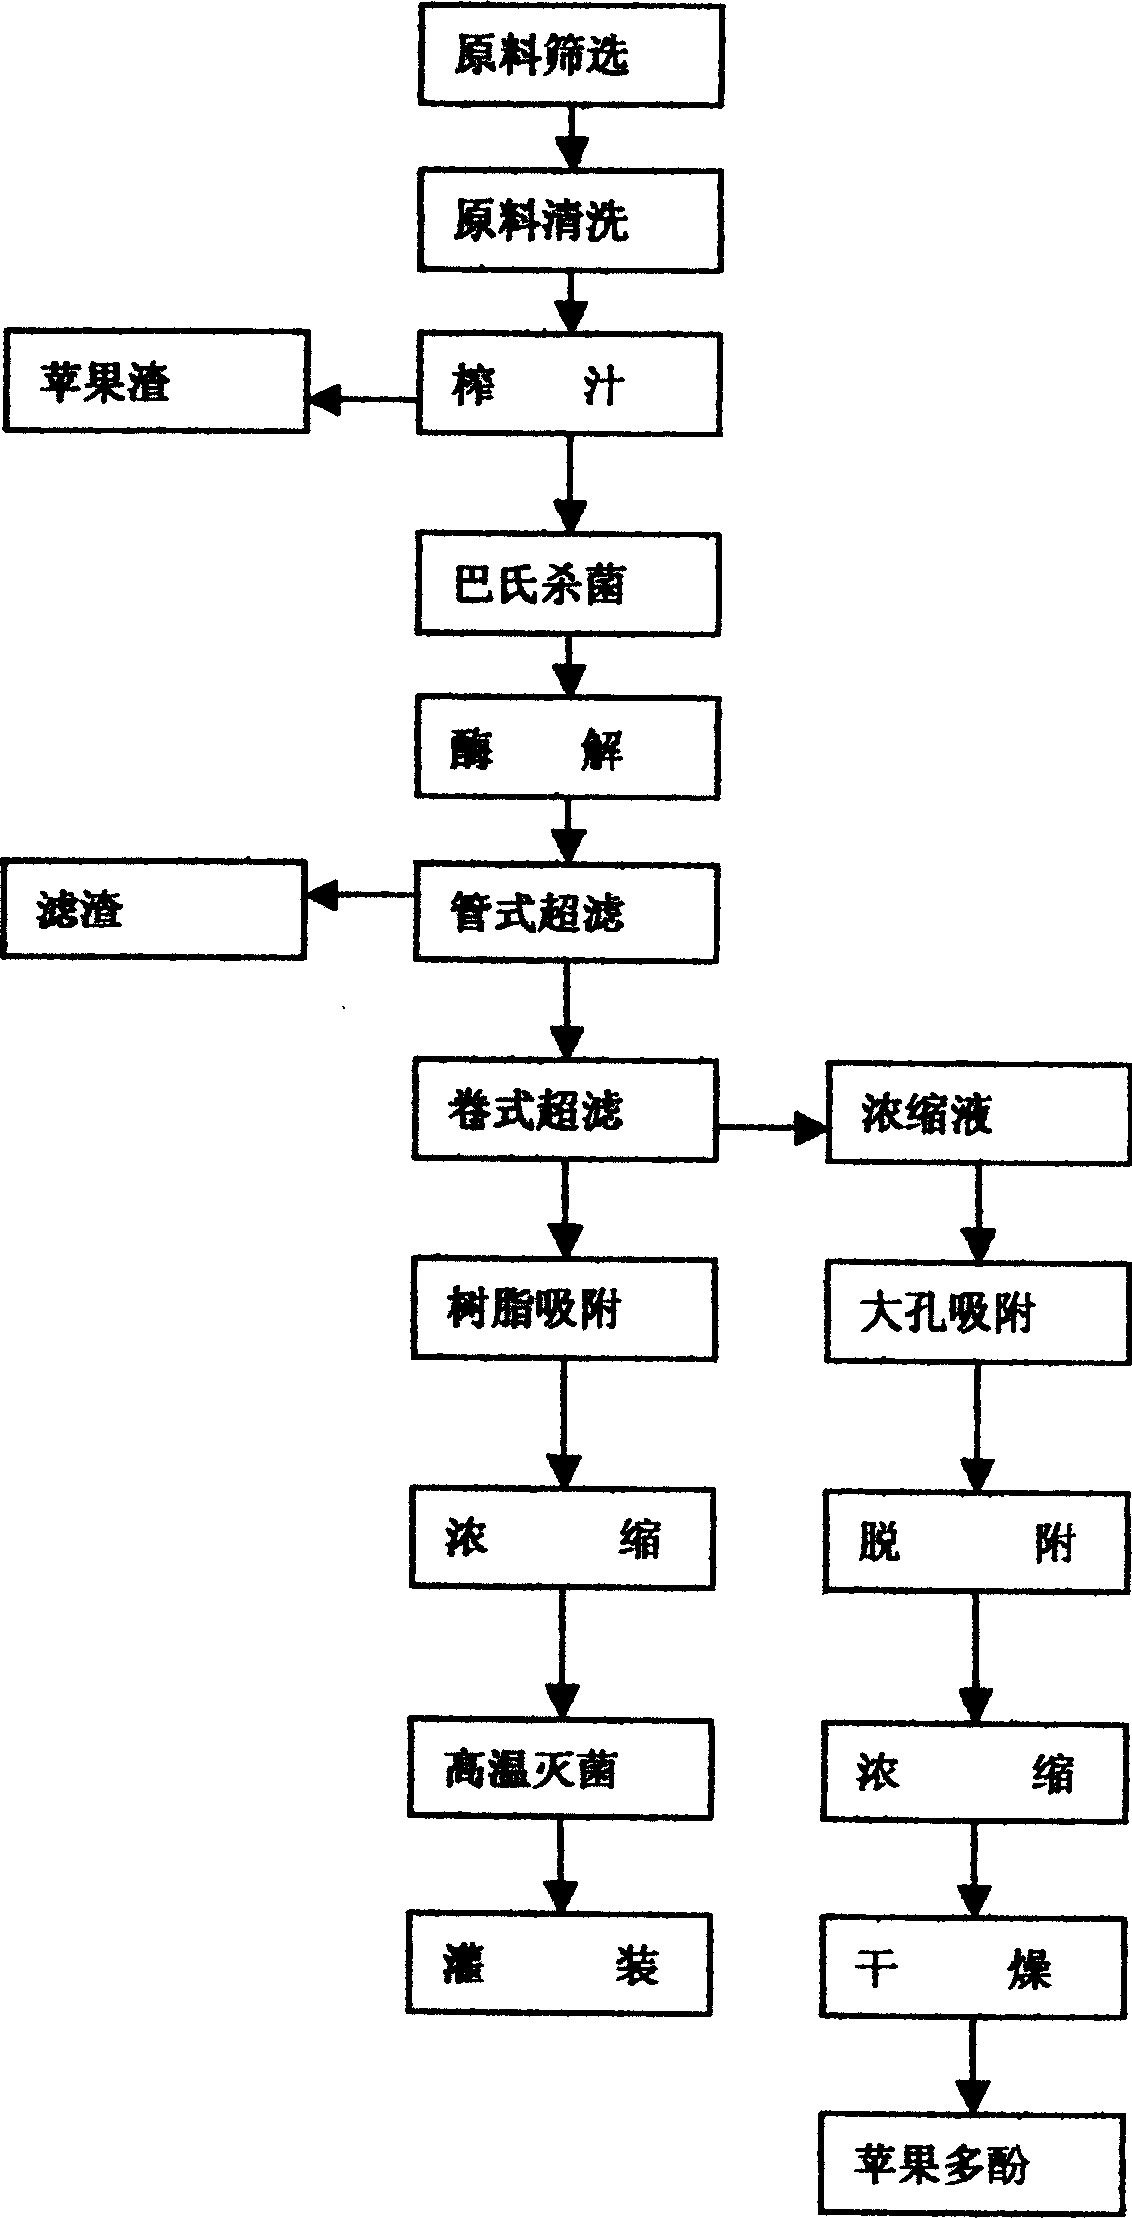 Process for separating protein, apple polyphenol, apple starch and pigment from apple juice